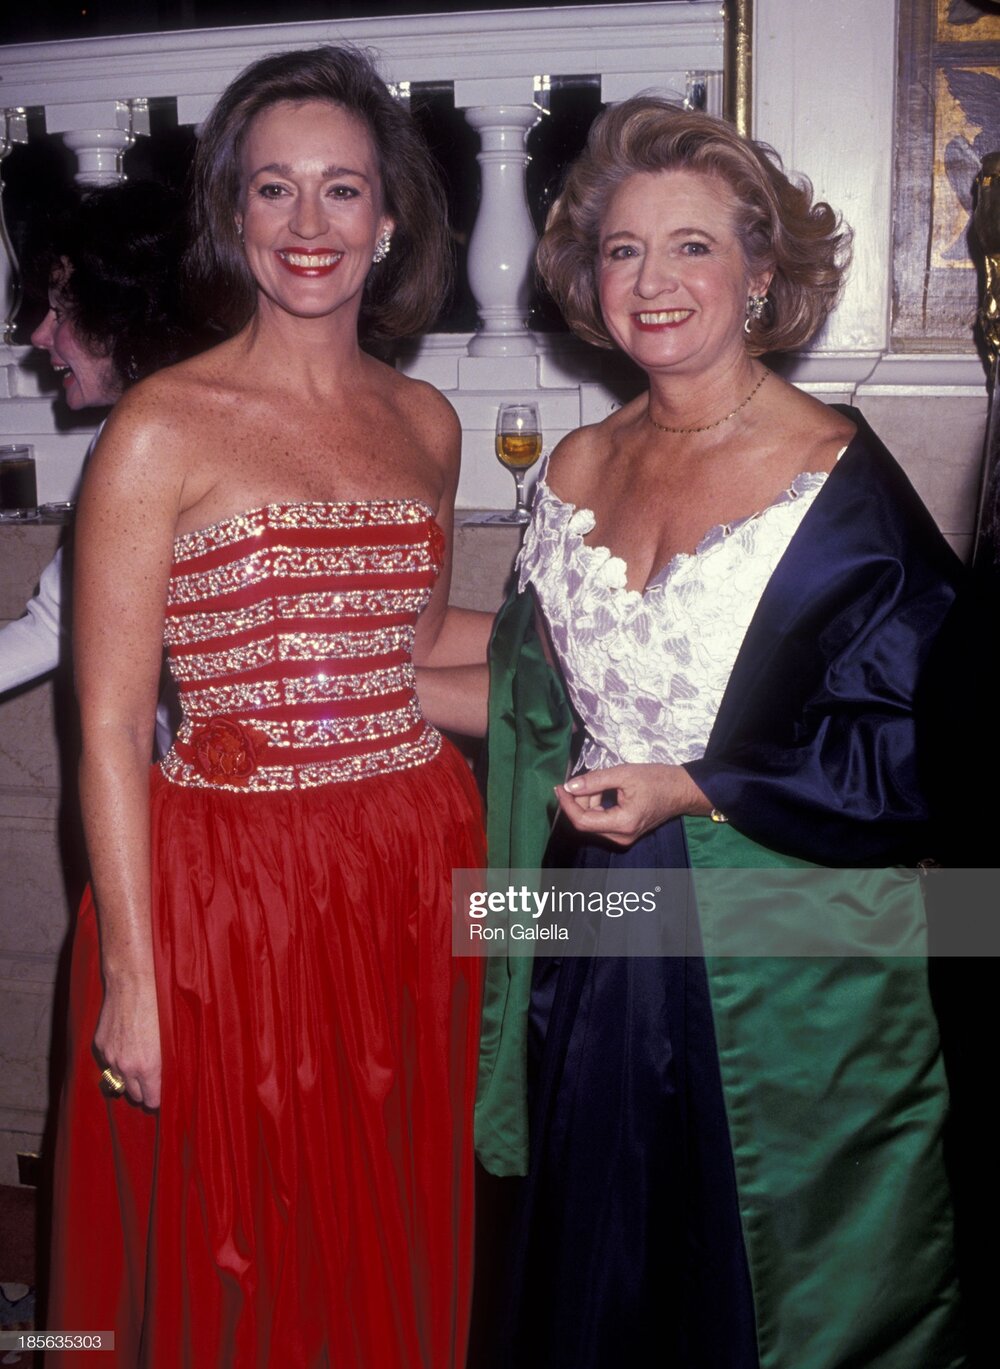 Anne Fuchs and Shirley Lord Rosenthal attend Winternight Benefit on November 18, 1991 at the Plaza Hotel. Photo by Ron Galella.